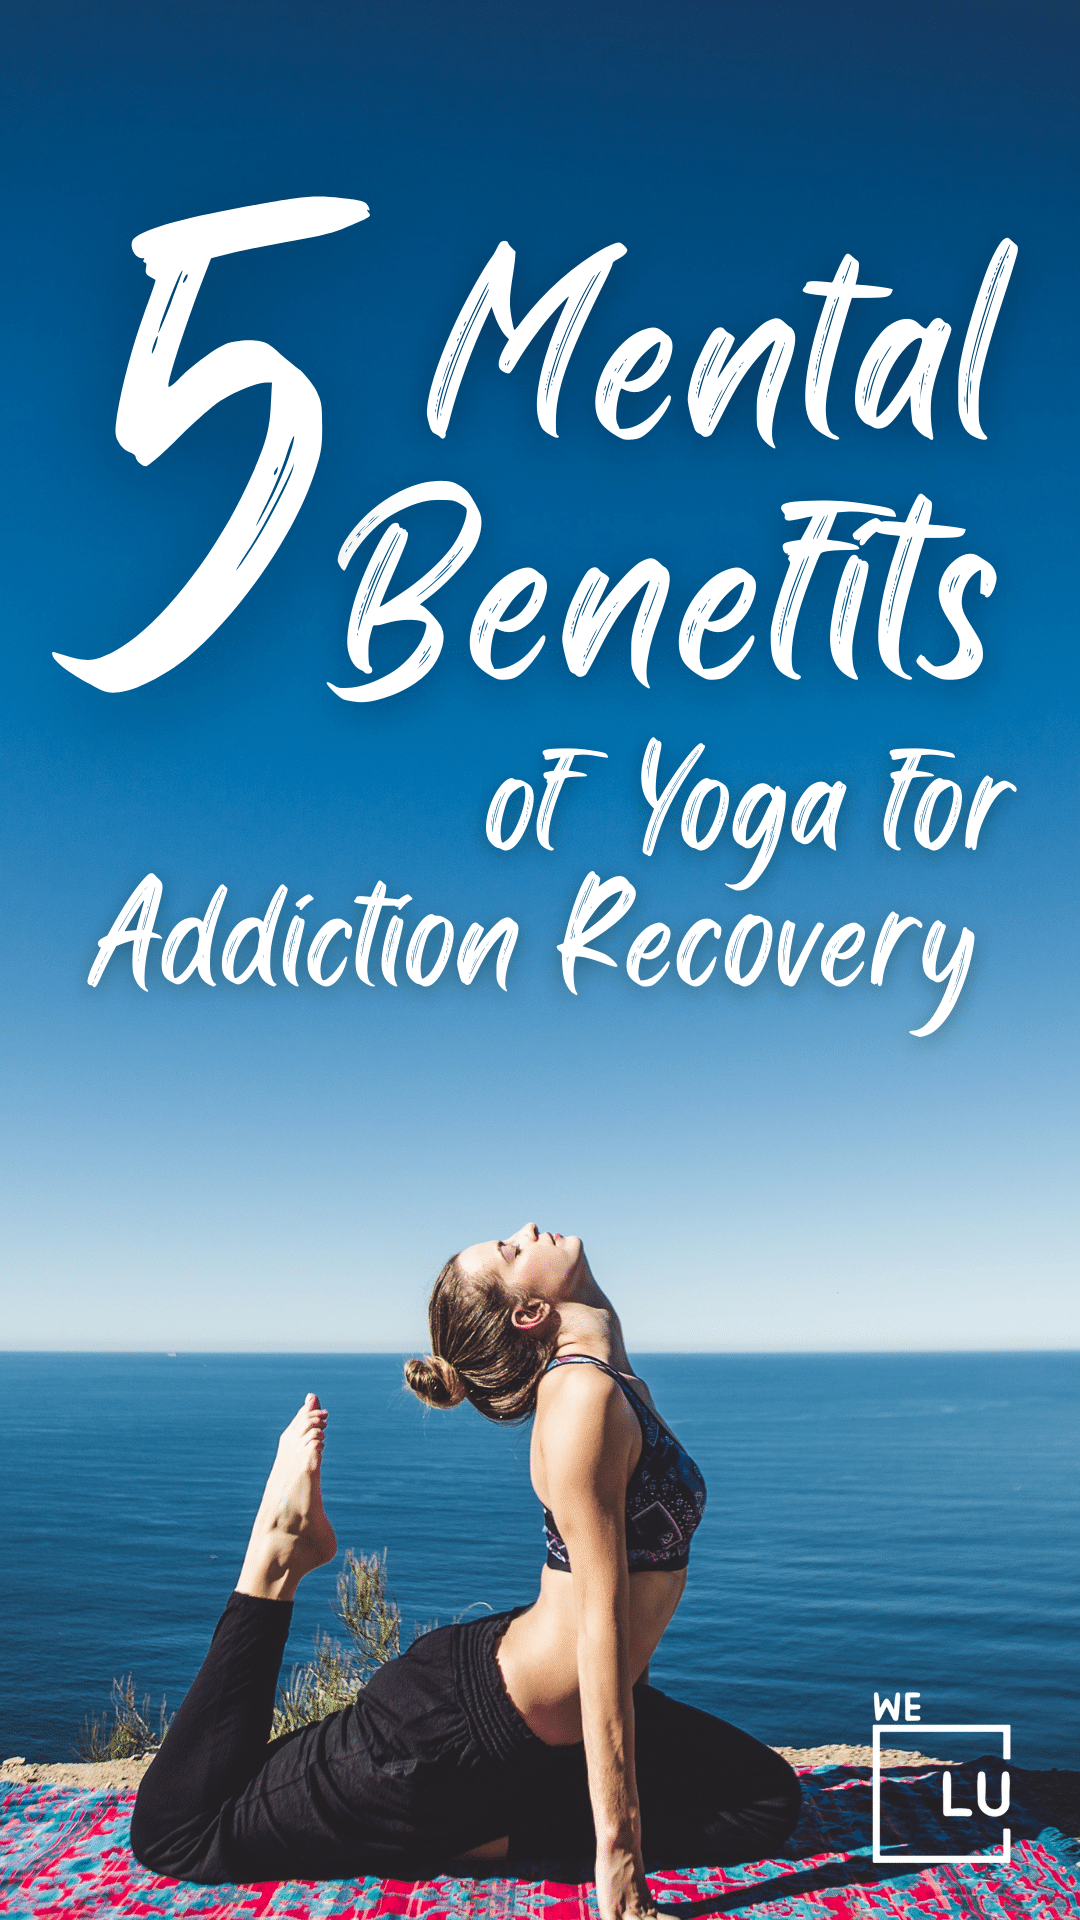 Yoga helping some people with addiction, mental health problems